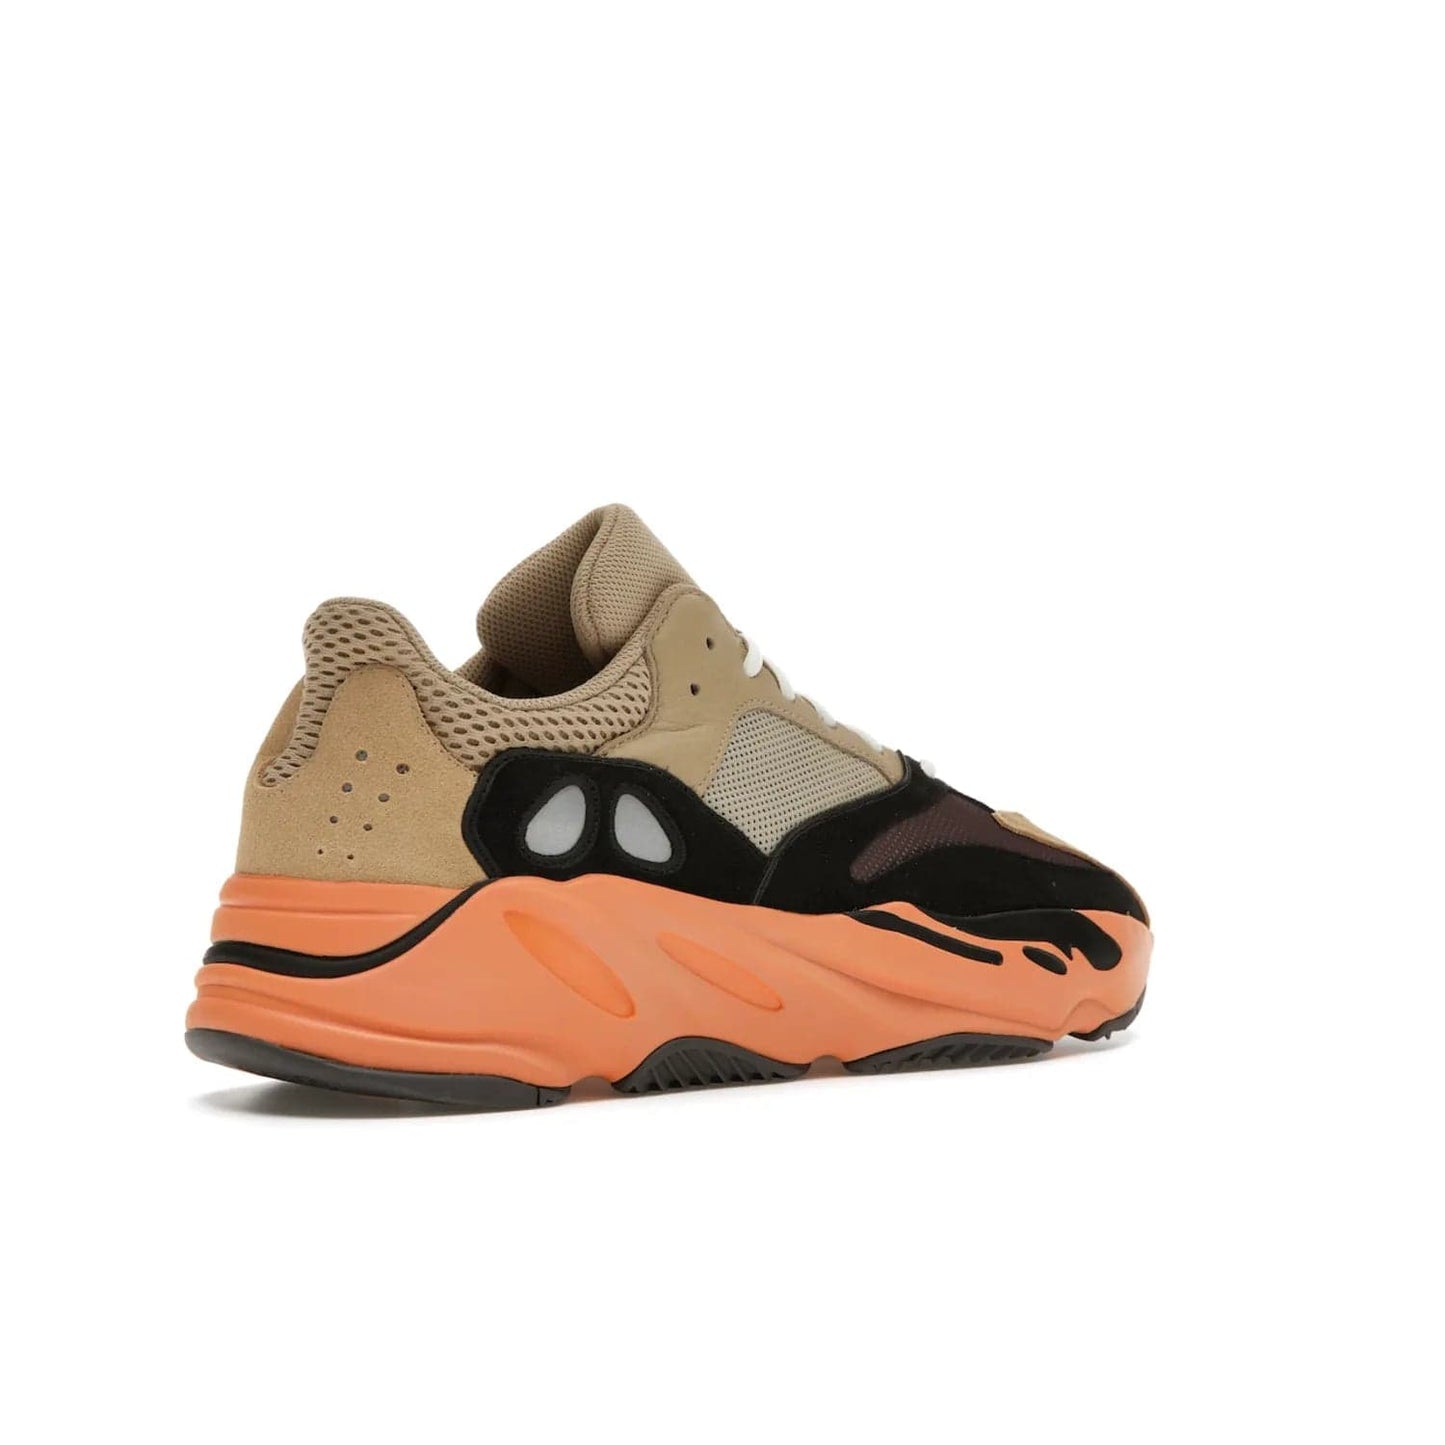 adidas Yeezy Boost 700 Enflame Amber - Image 33 - Only at www.BallersClubKickz.com - Adidas Yeezy Boost 700 Enflame Amber: Eye-catching design with pale yellow, brown, teal, and orange! Get yours in June 2021.